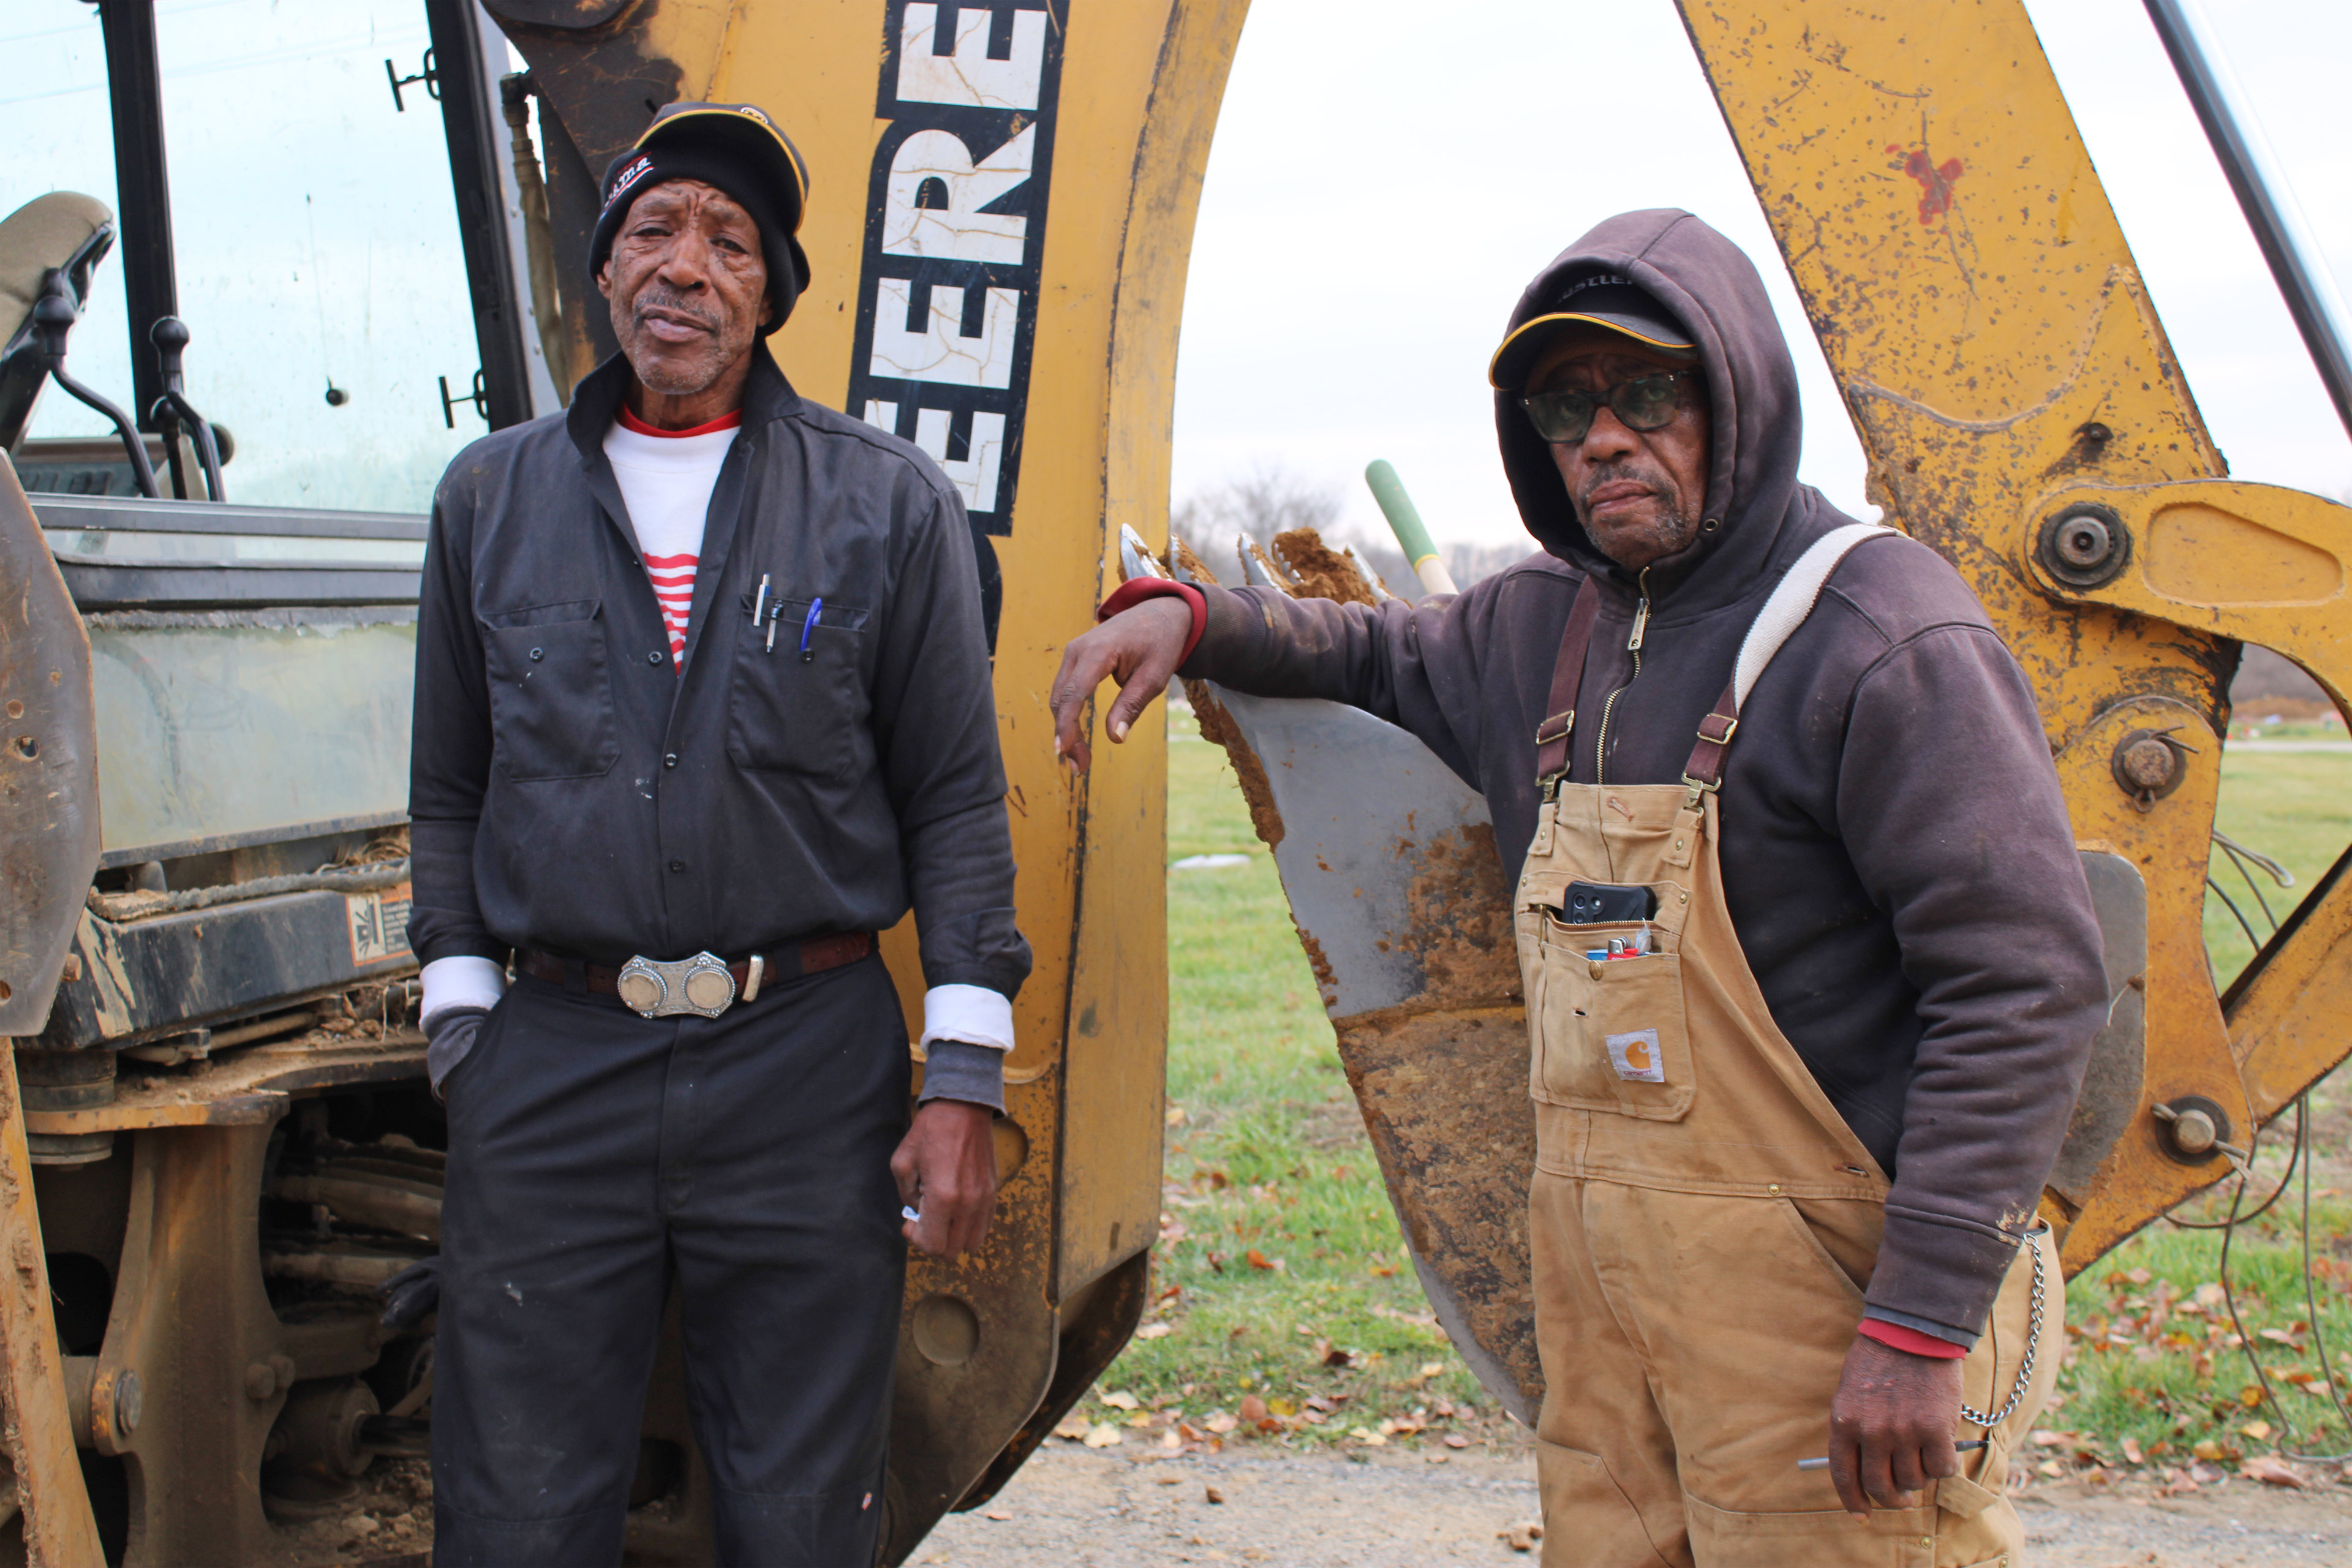 A photo shows Johnnie Haire and William Belt Sr. posing for a photo together in front of an excavator.